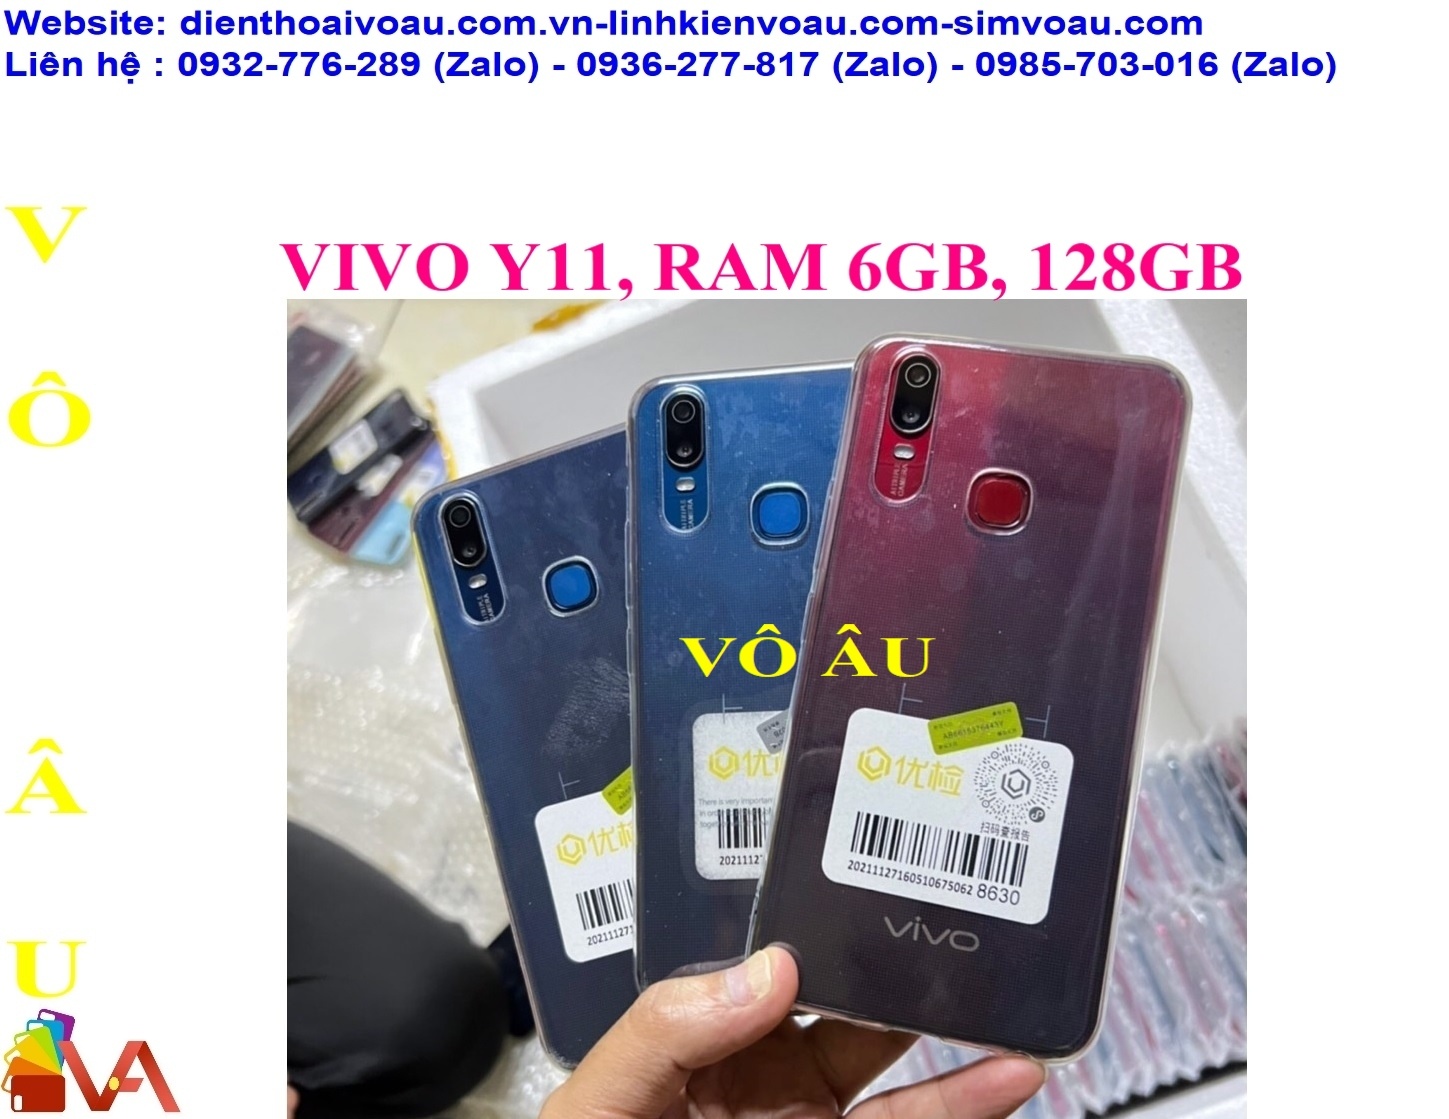 Buy Mobi Elite Abstract Wallpaper Printed Hard Back Cover Case with Mobile  Holder, Pop holder, Pop socket for Vivo Y17, Vivo Y15, Vivo Y12, Vivo Y11,  Vivo U10 Online at Best Prices